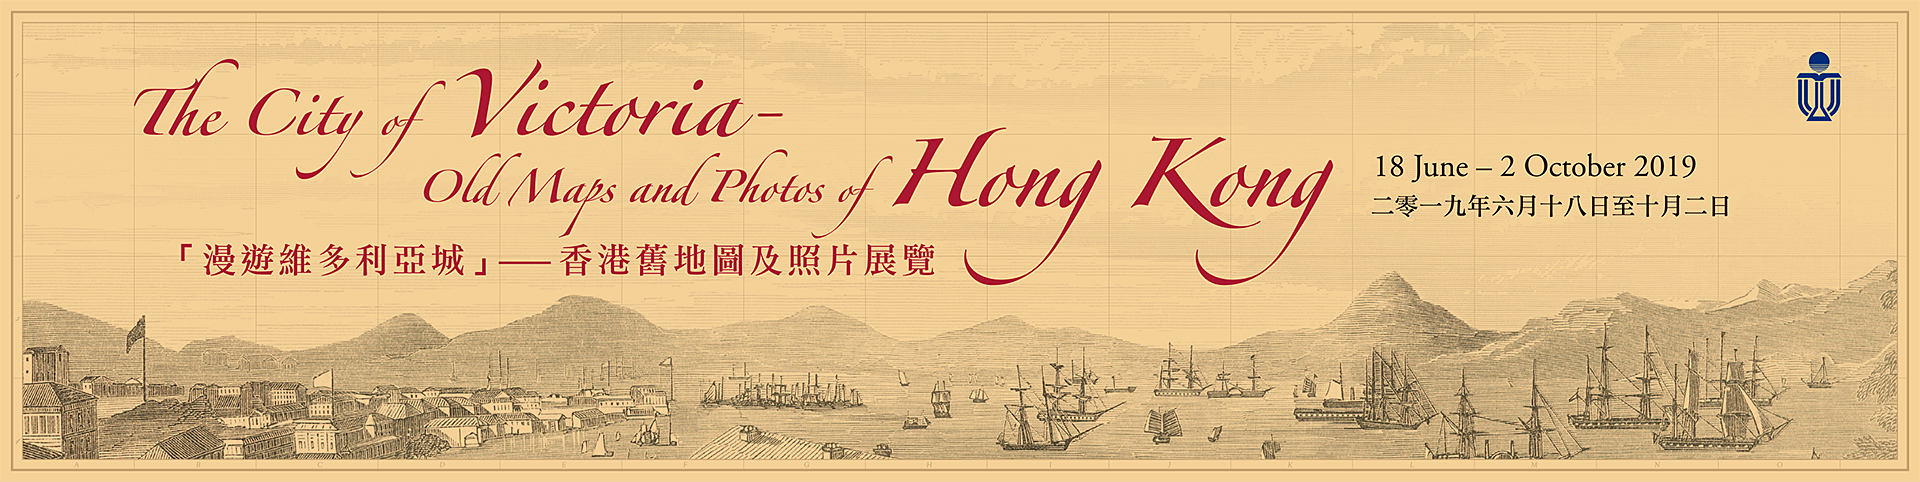 The City of Victoria - Old Maps and Photos of Hong Kong